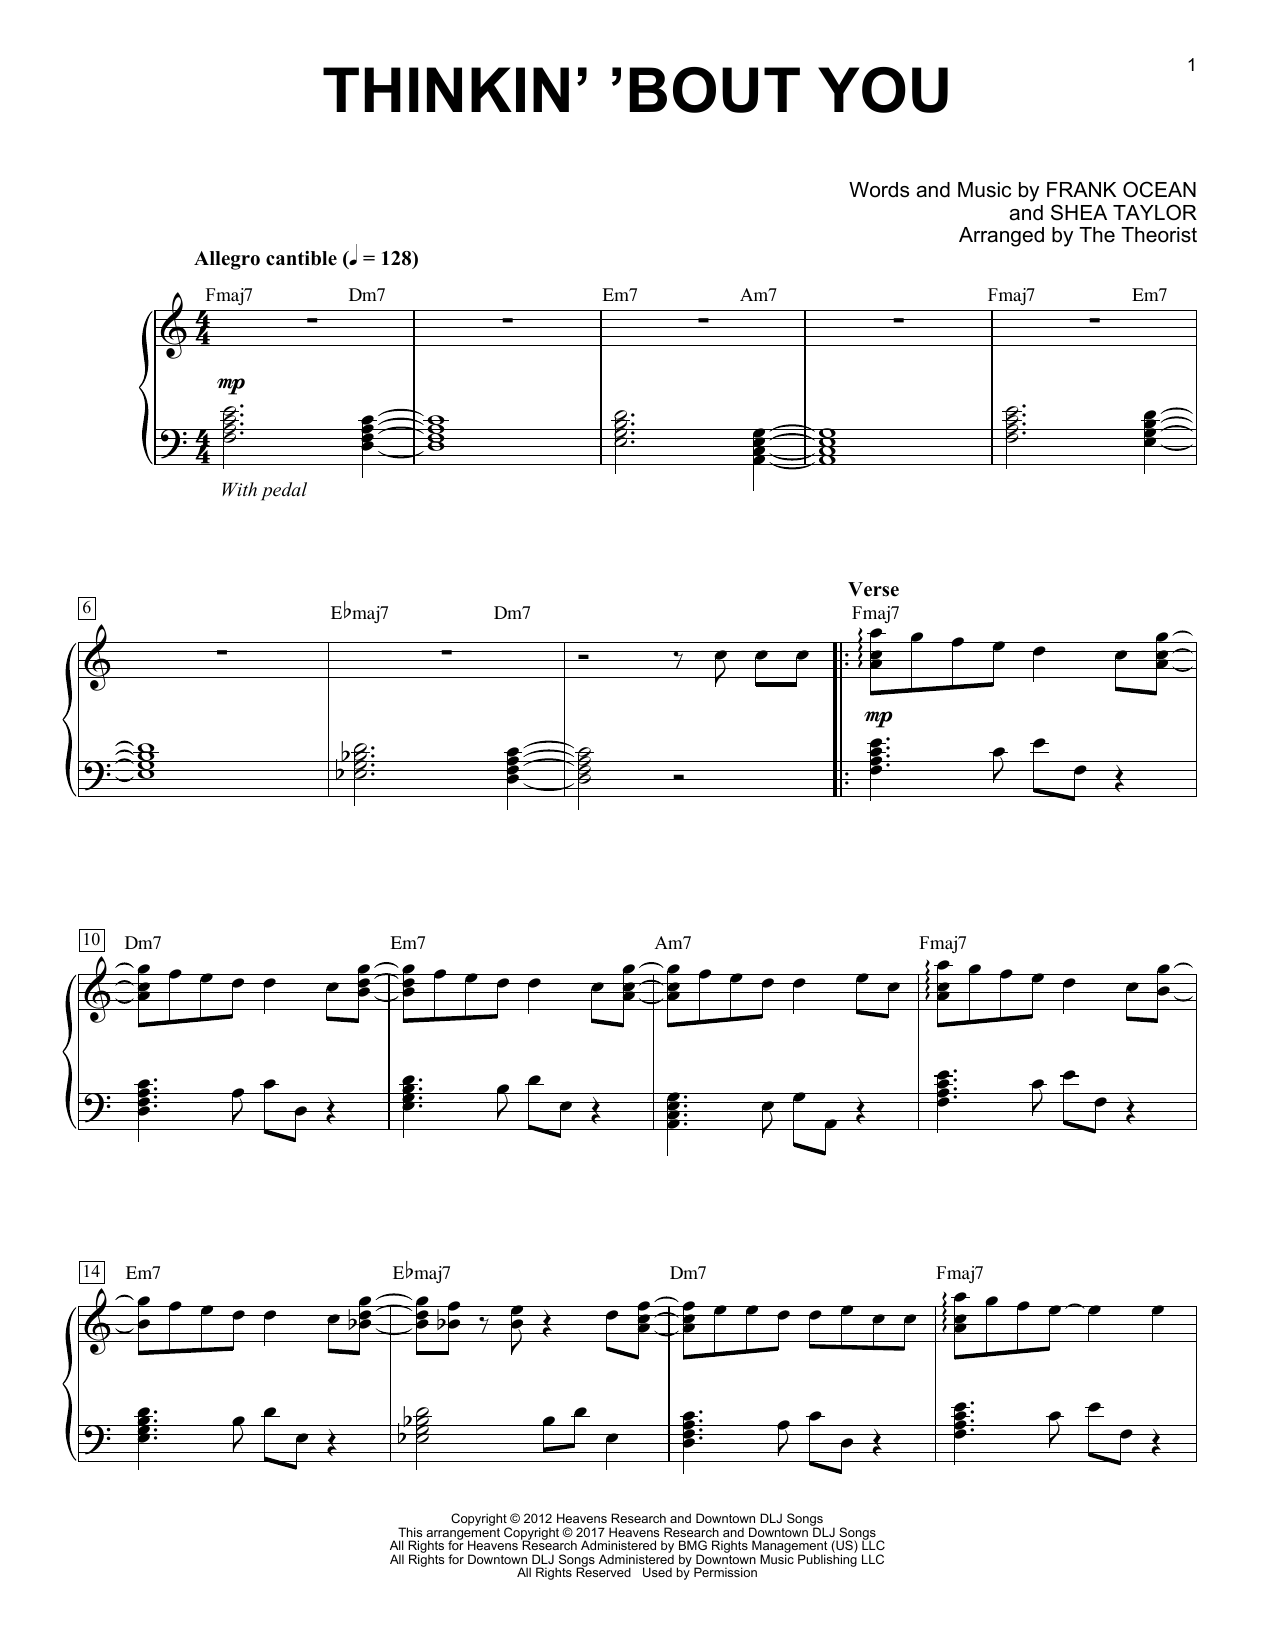 Download The Theorist Thinkin' 'Bout You Sheet Music